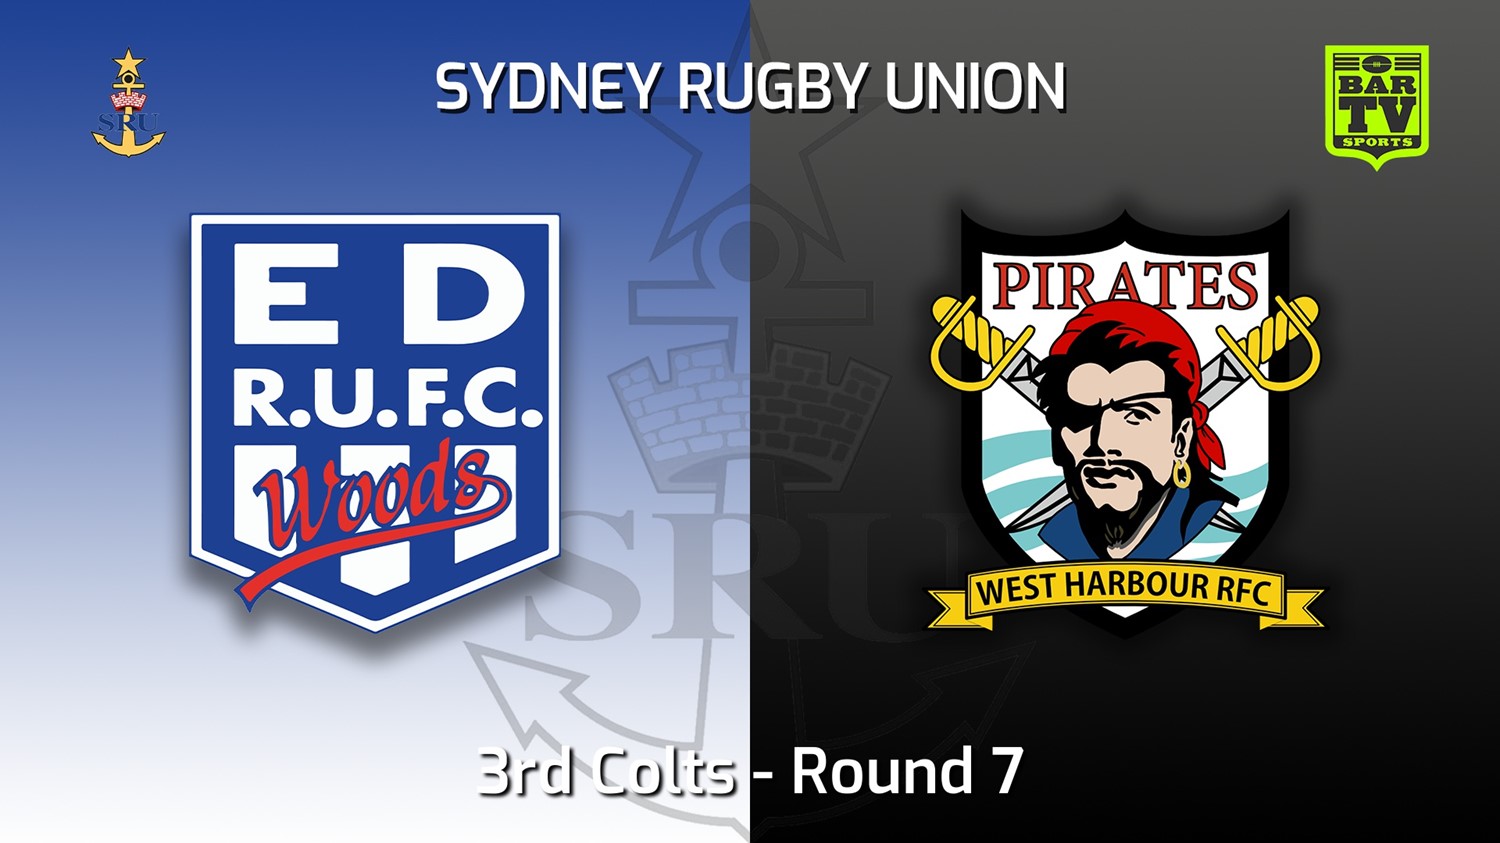 220514-Sydney Rugby Union Round 7 - 3rd Colts - Eastwood v West Harbour Slate Image